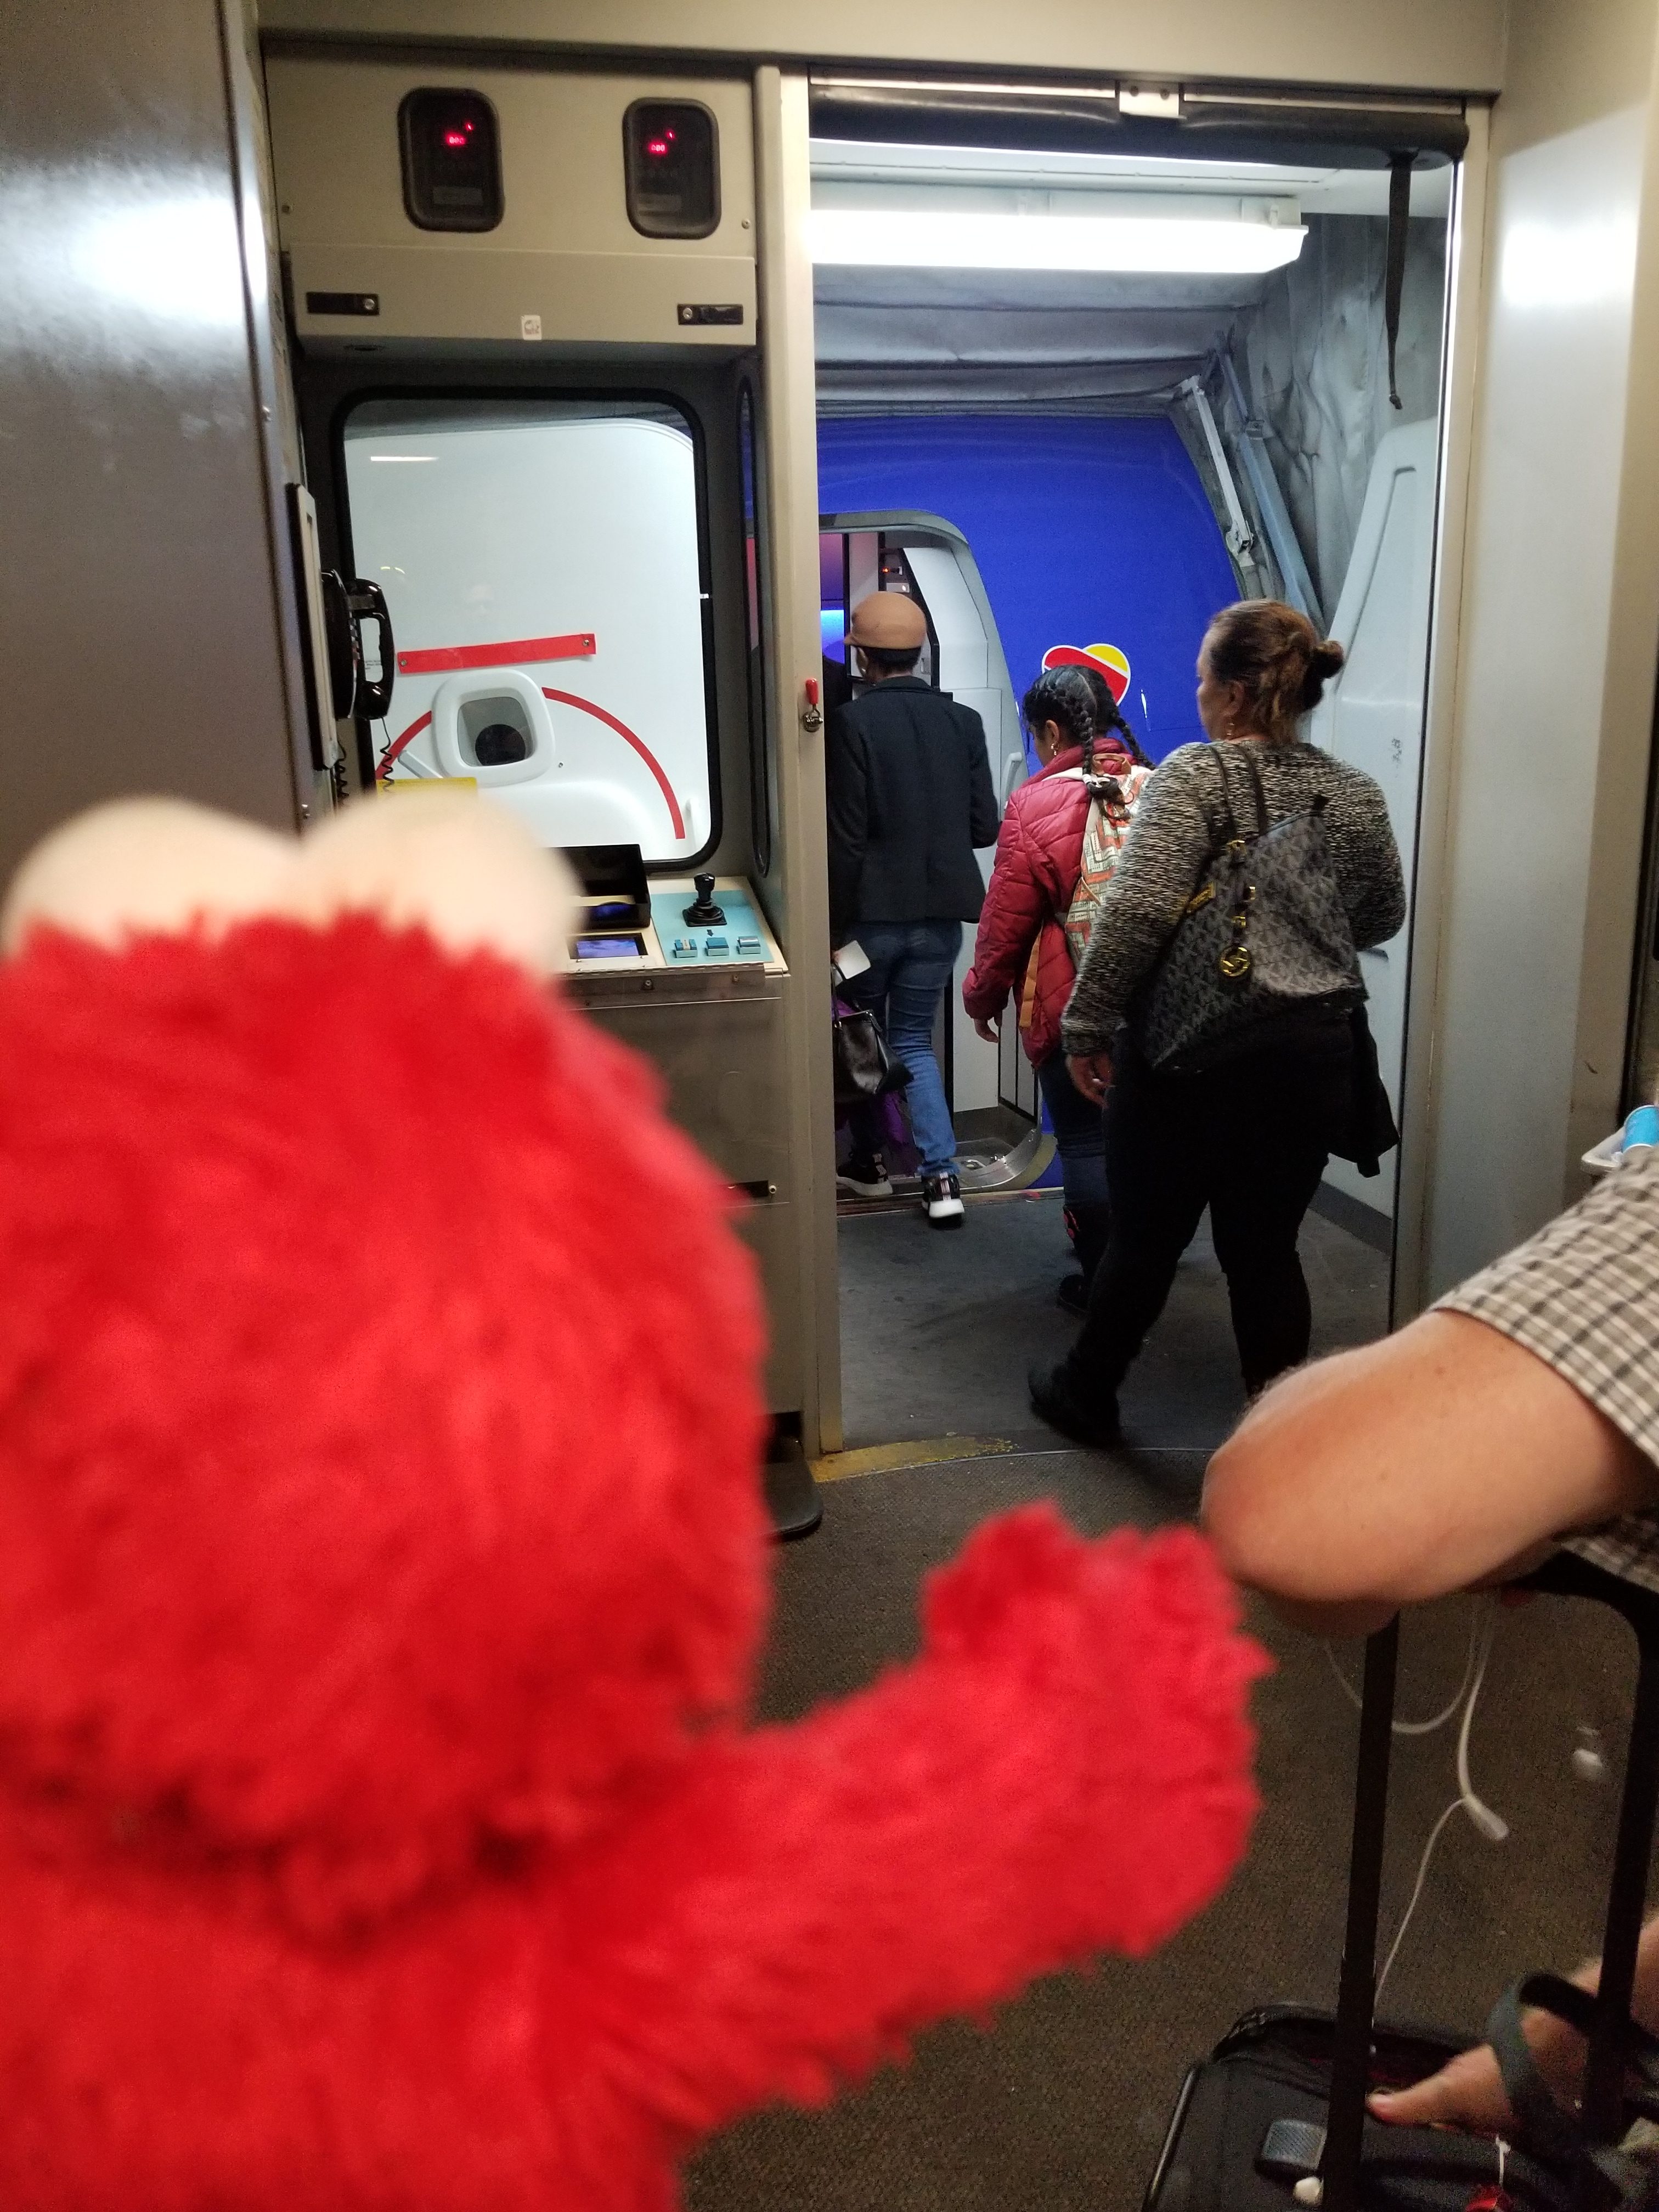 Elmo is excited, he can see the plane!